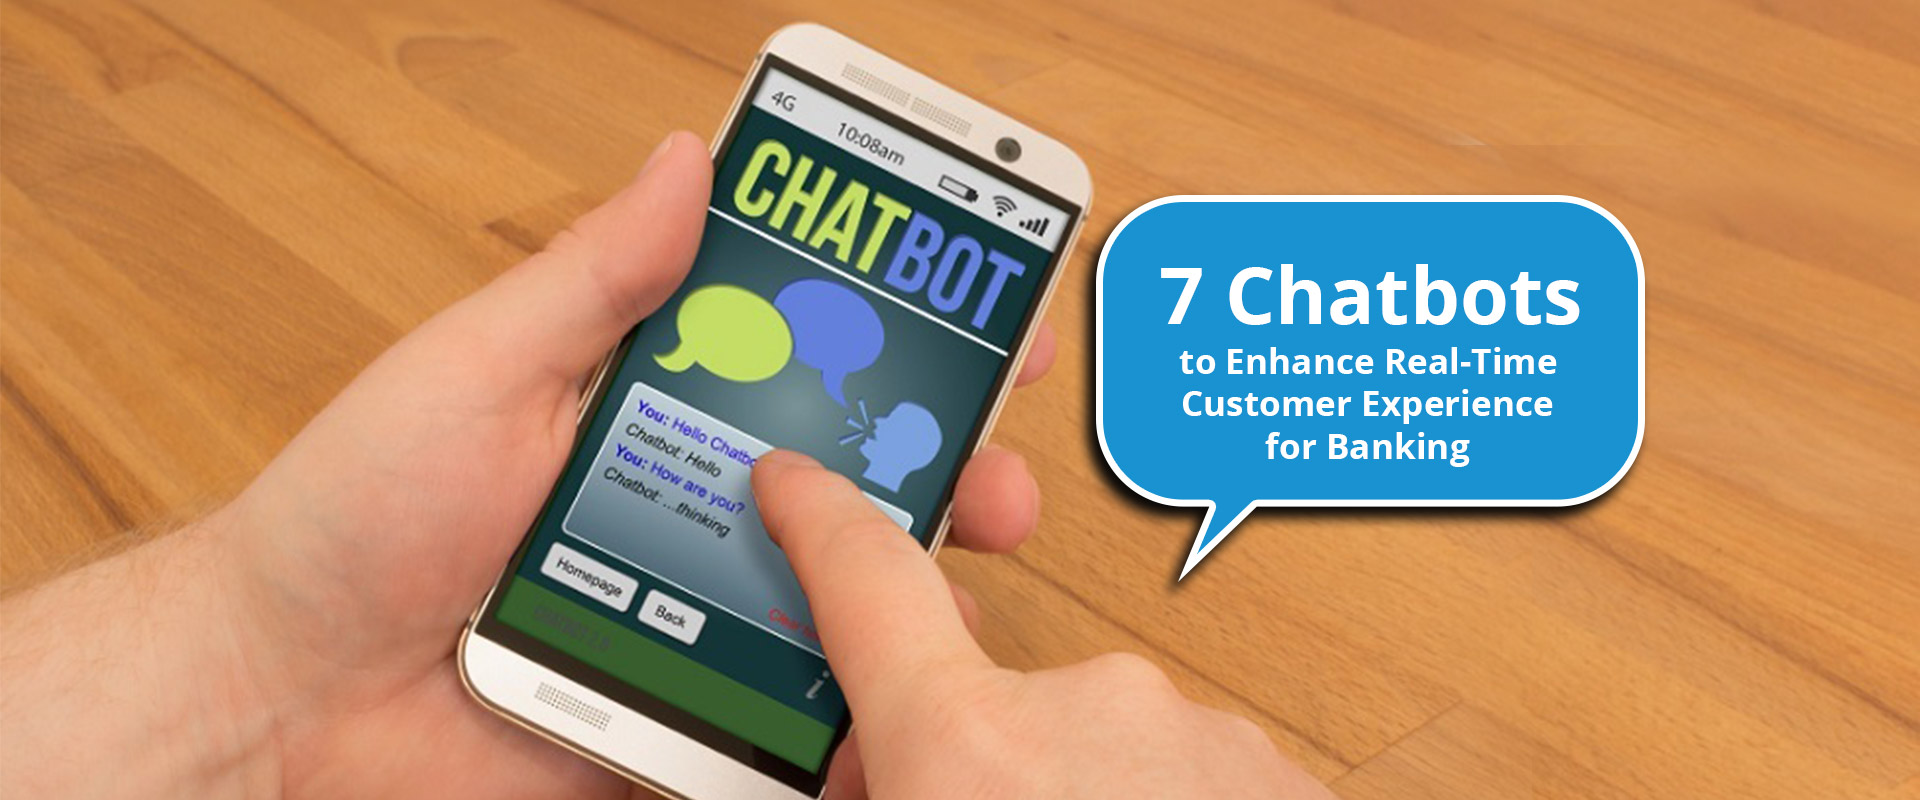 chatbot app for financial services organizations